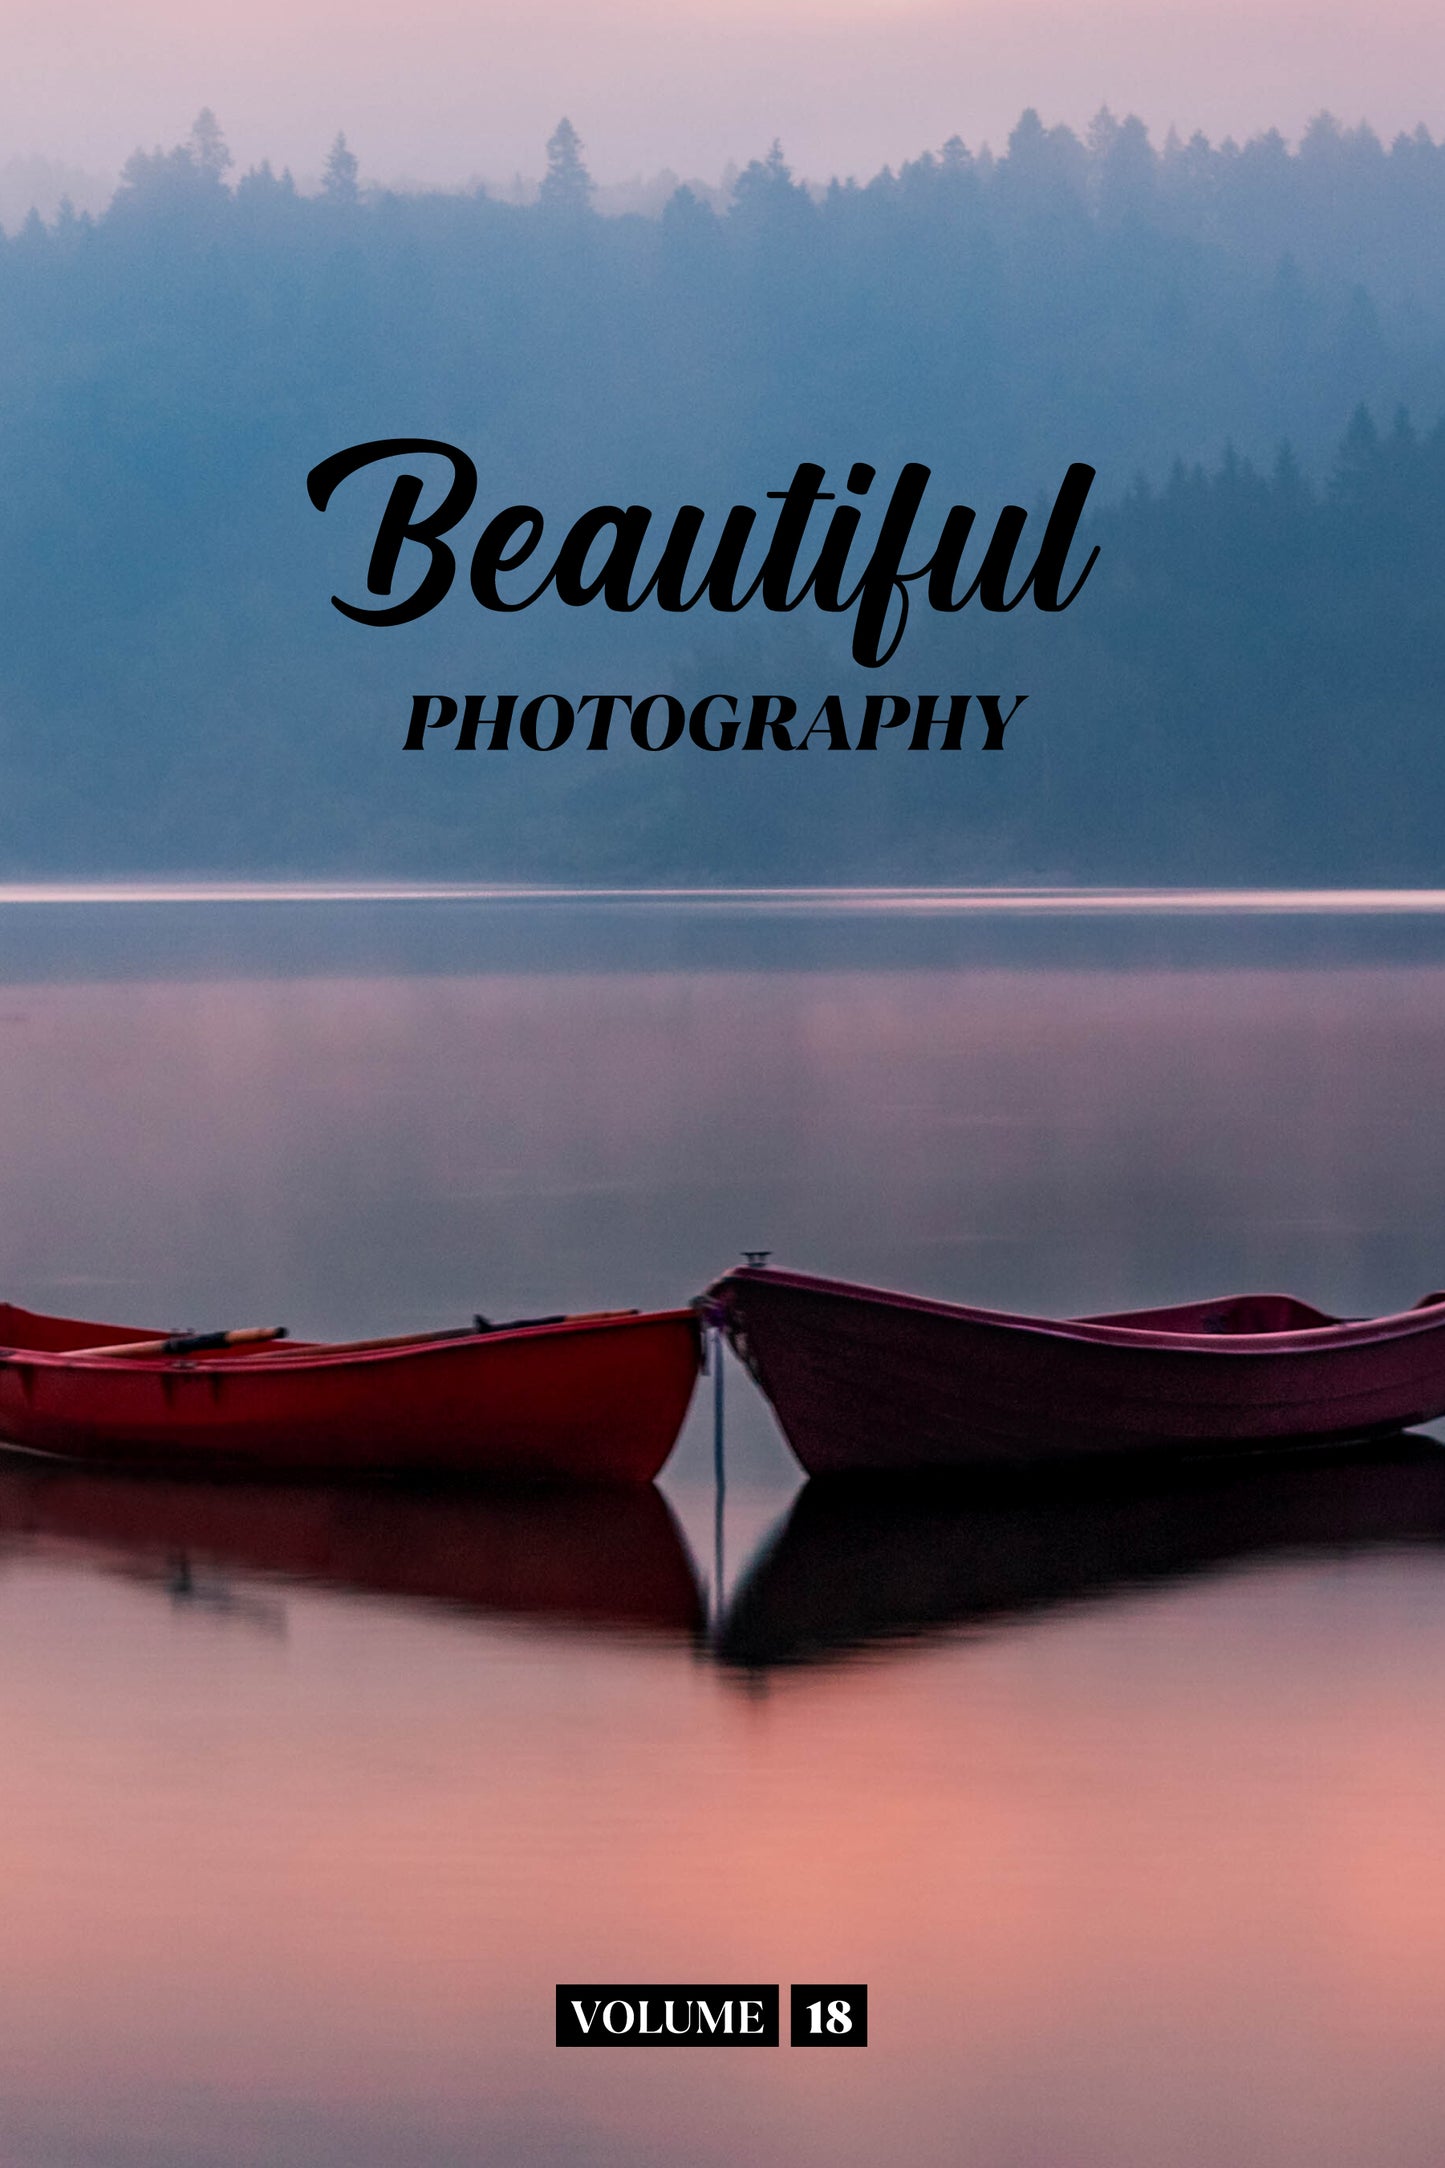 Beautiful Photography Volume 18 (Physical Book Pre-Order)